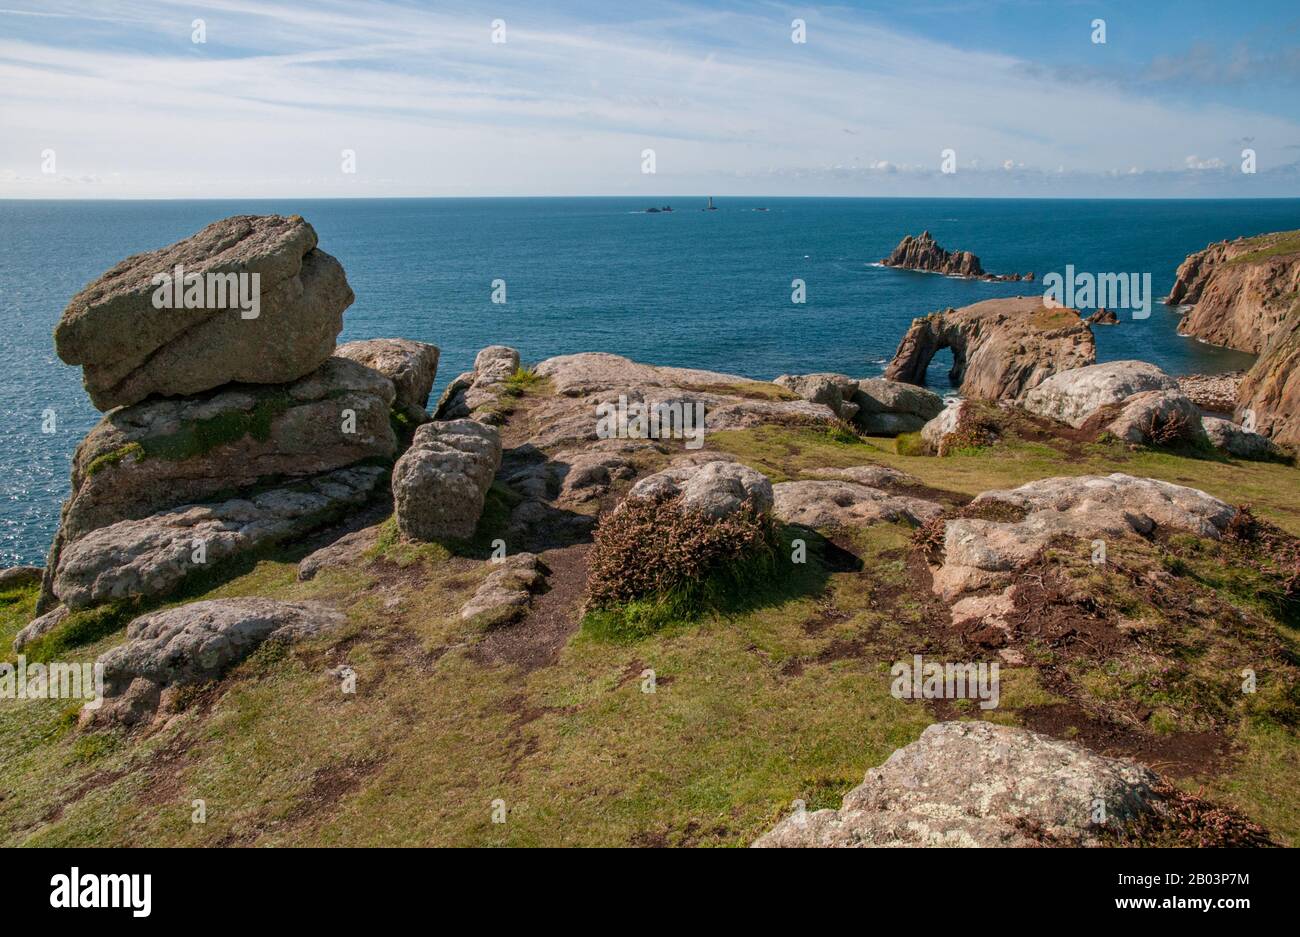 Views over the Celtic Sea from Land's End, Cornwall, across the dramatic landscape, skerries and Longships Lighthouse in the distance. Stock Photo